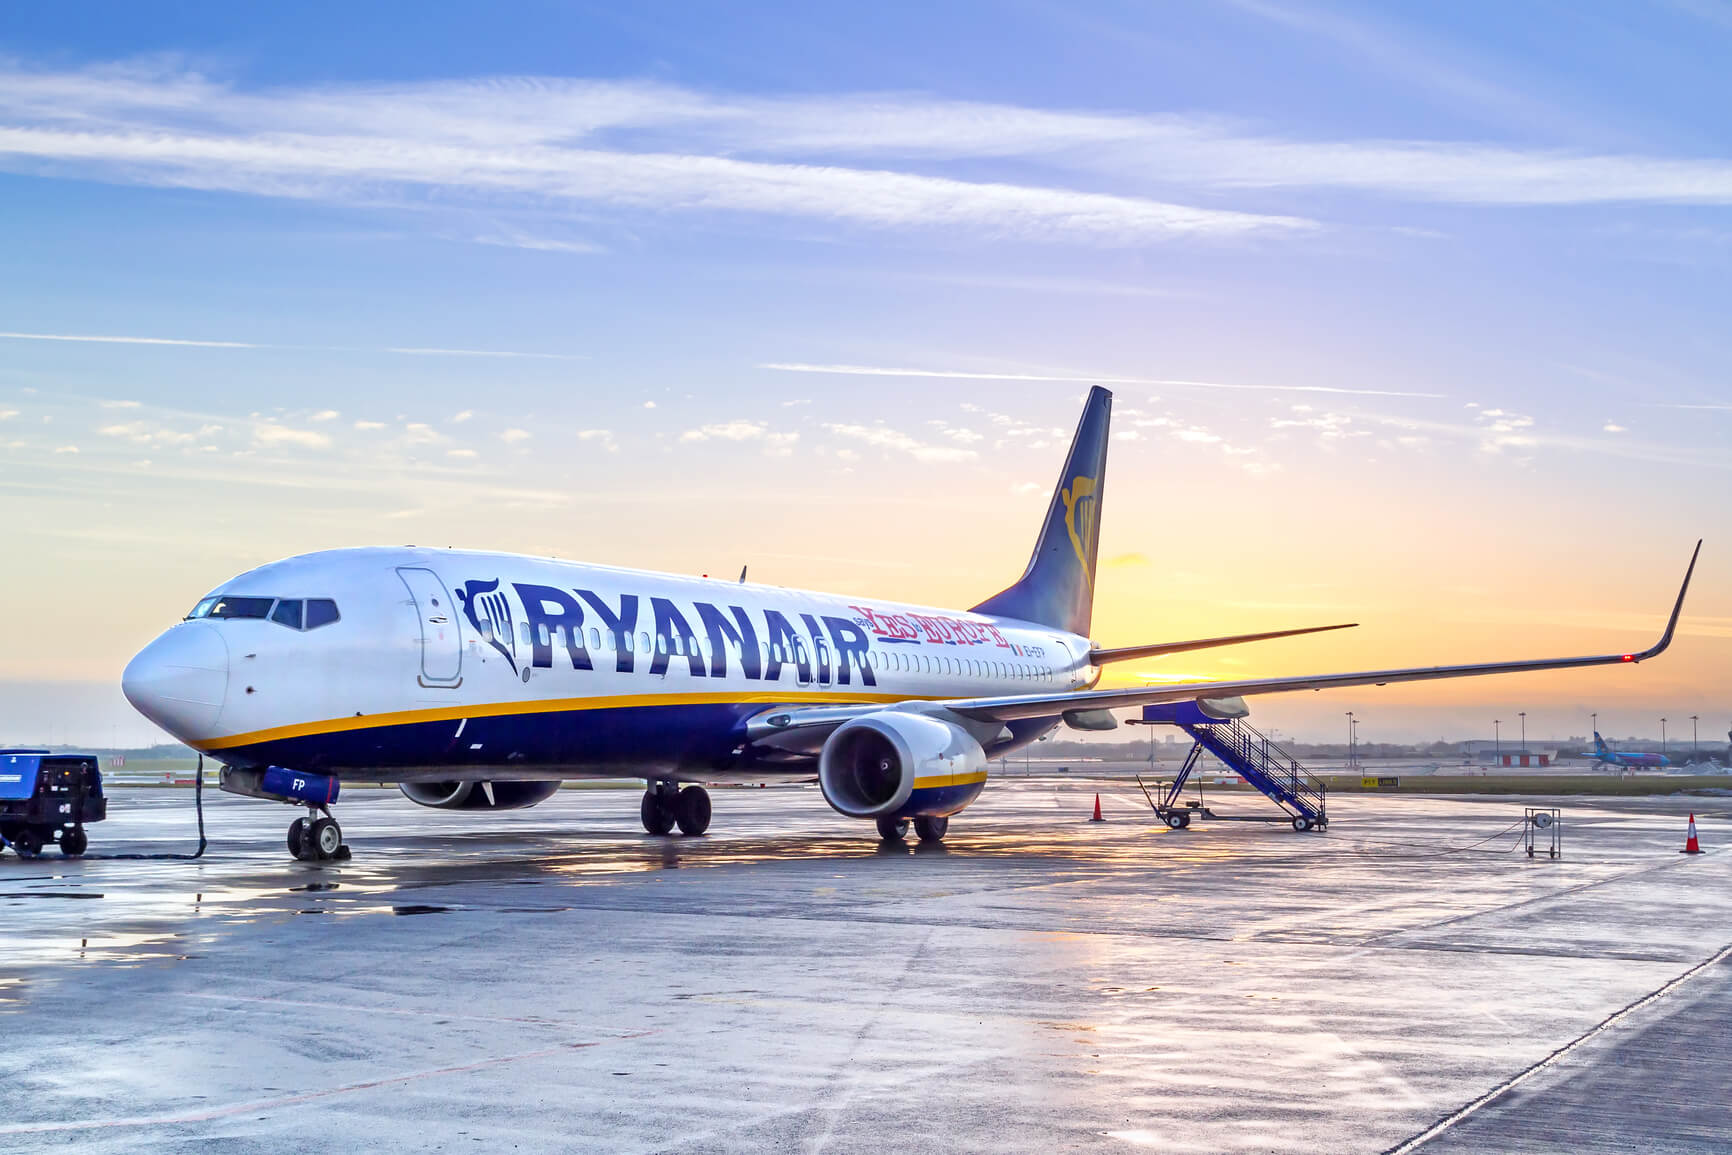 <div class='expired'>EXPIRED</div>FLASH SALE: Ryanair flights across Europe from only €5 roundtrip | Secret Flying